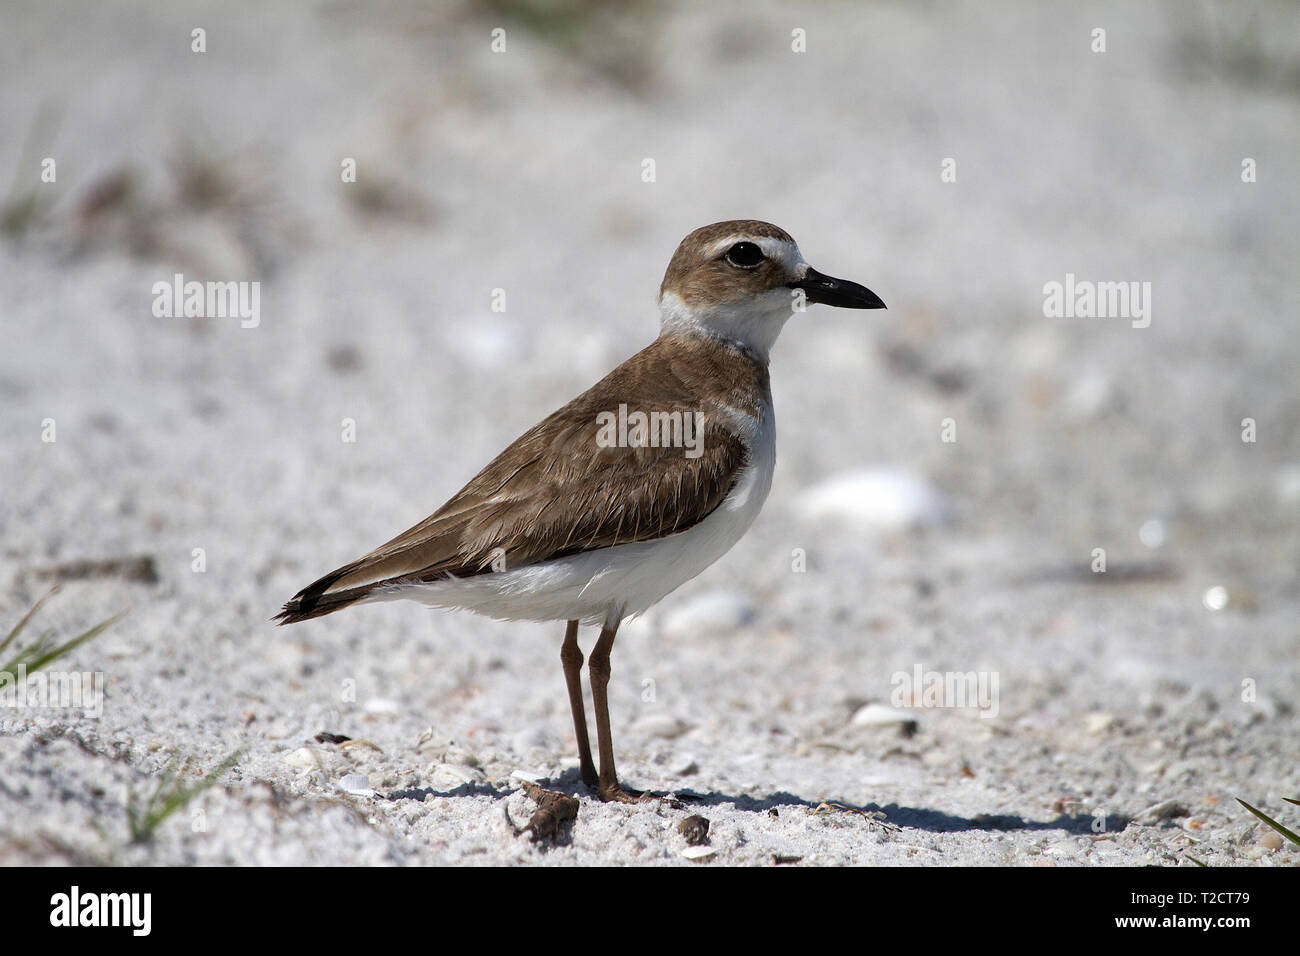 Greater Sand Plover, Charadrius leschenaultii, standing on beach, USA Stock Photo